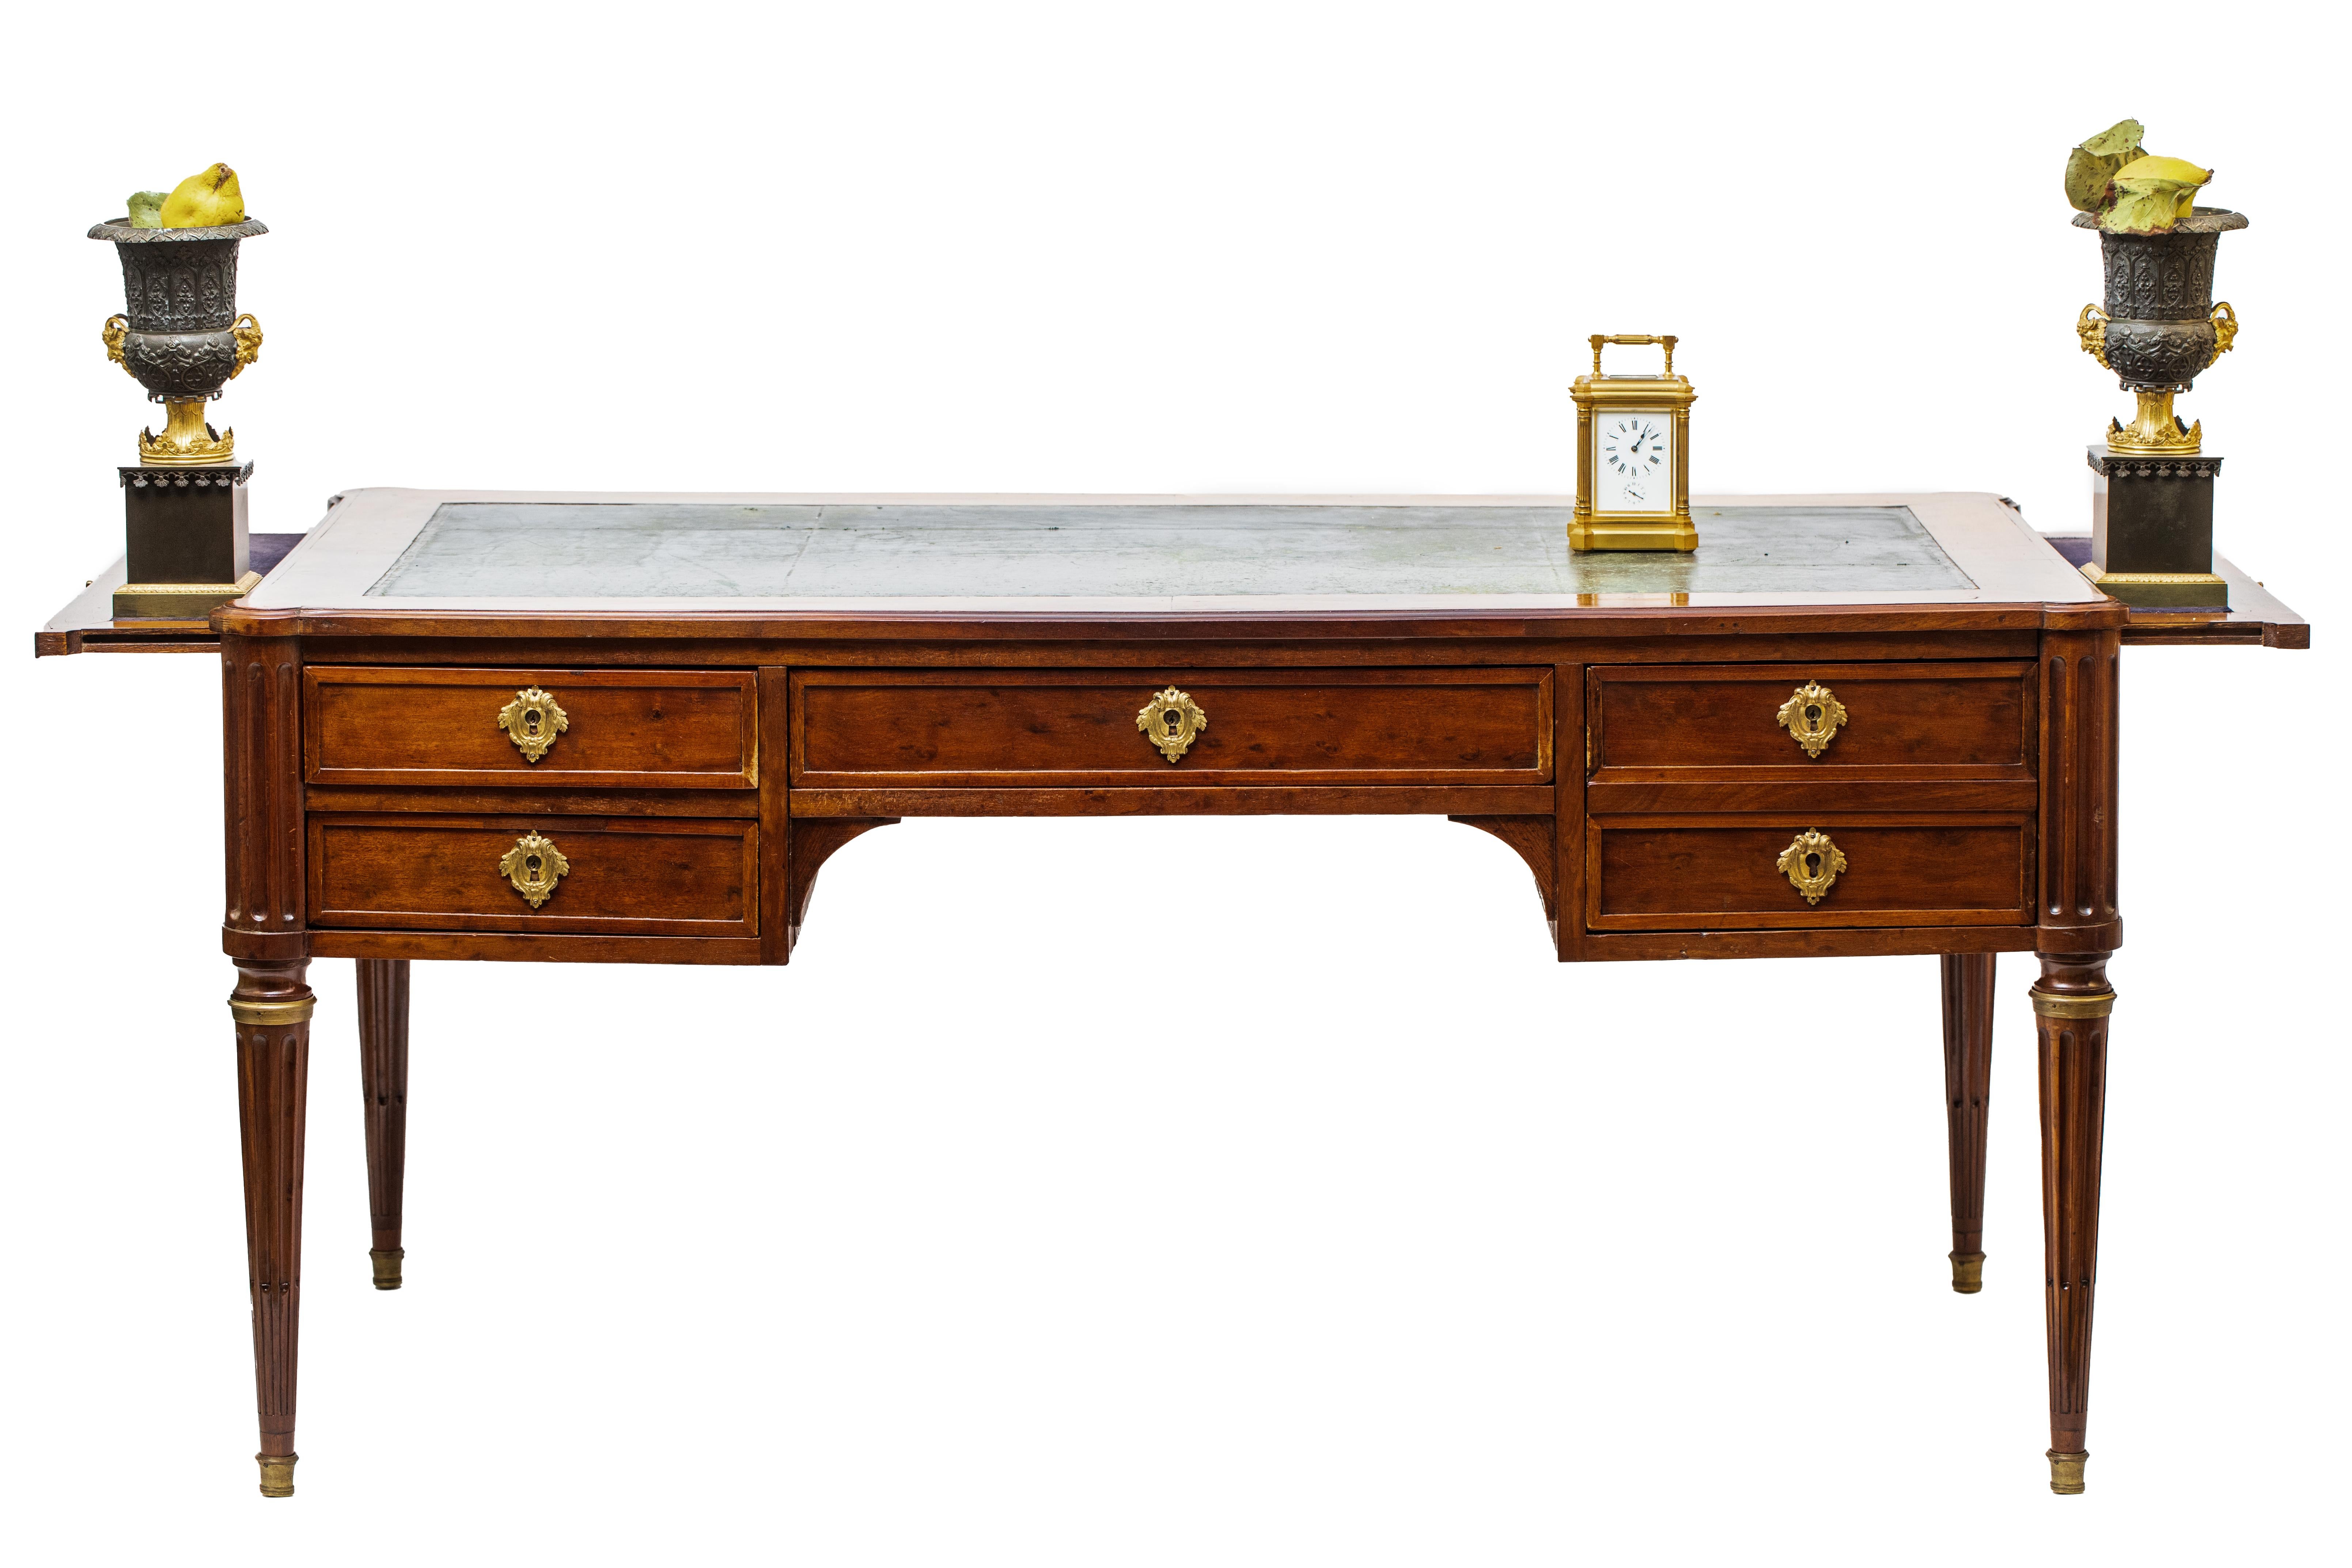 Louis XVI 18th Century Bureau Plat Mahogany France 1780 Writing Desk with Side Drawers For Sale